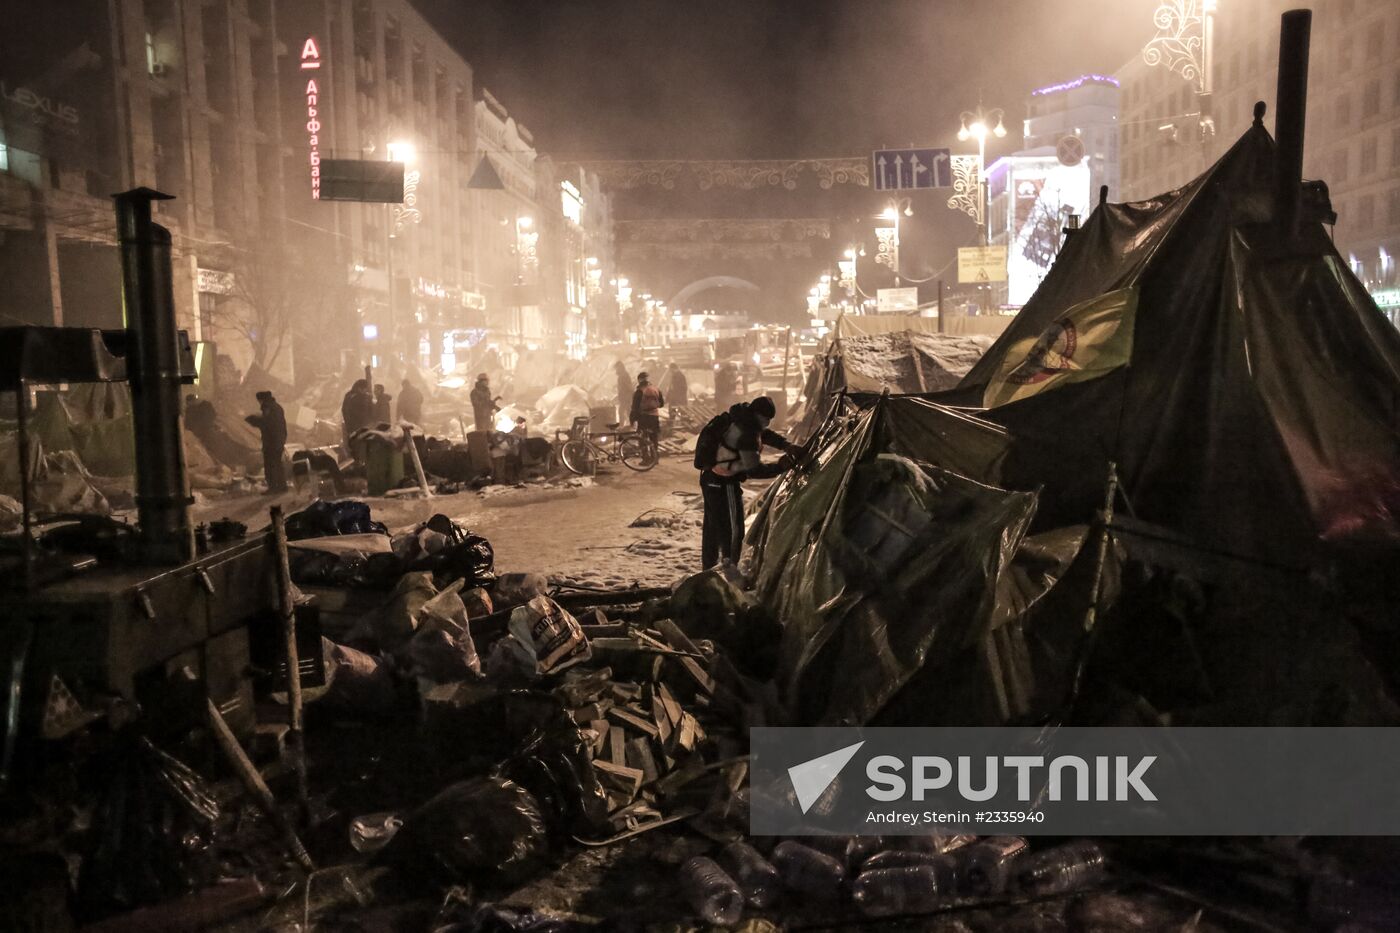 Internal security troops begin storming protester's camp on the Maidan